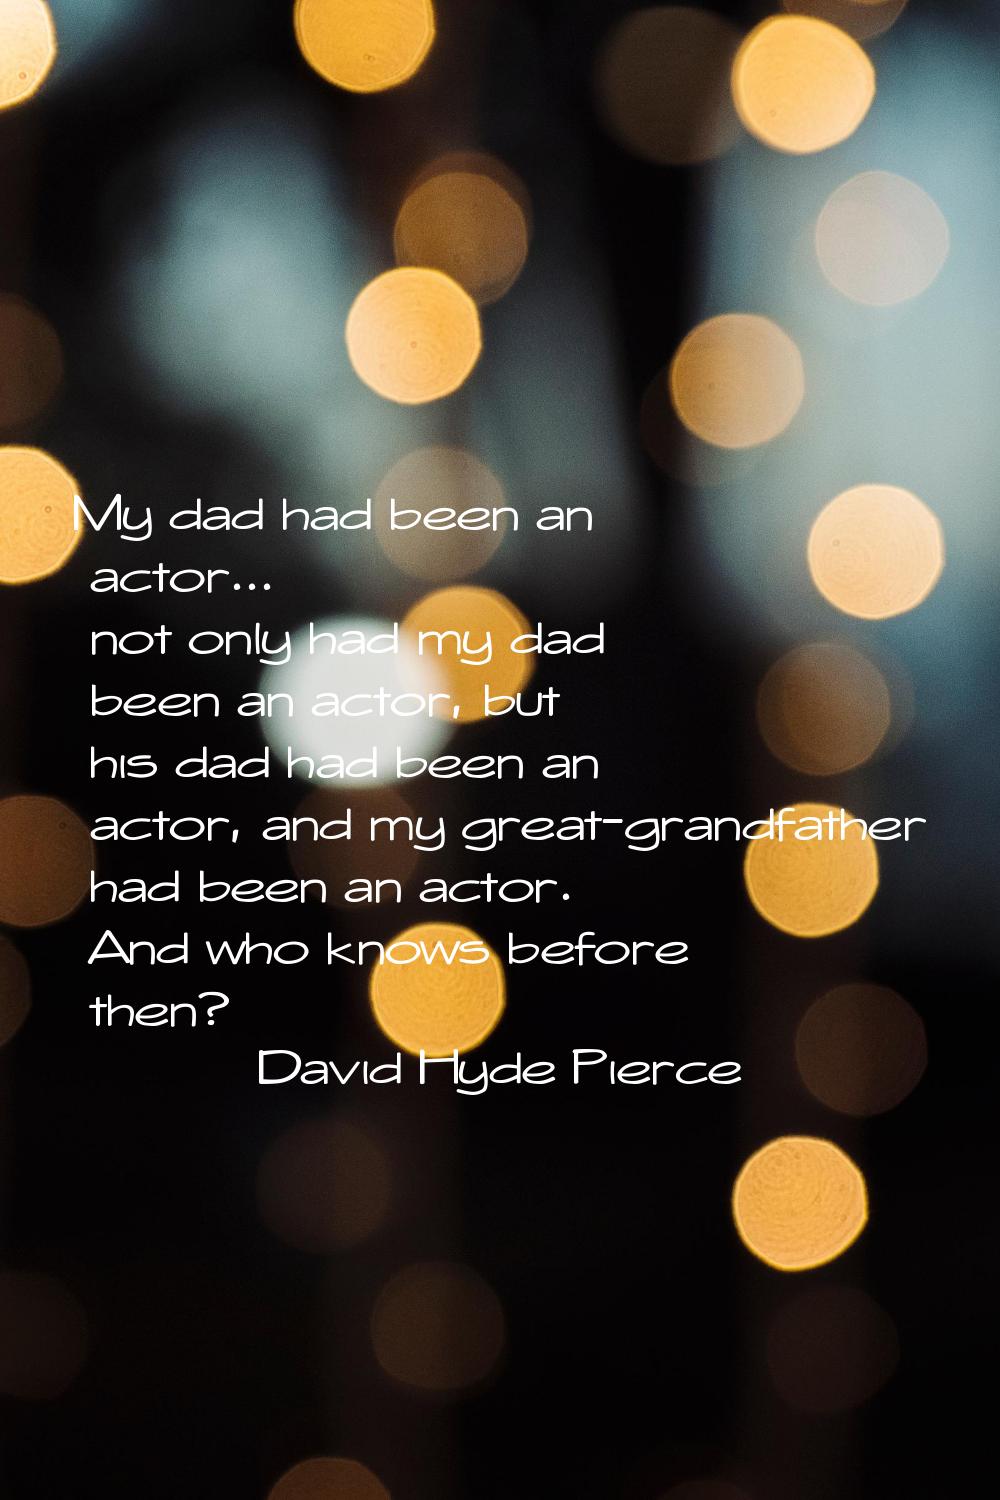 My dad had been an actor... not only had my dad been an actor, but his dad had been an actor, and m